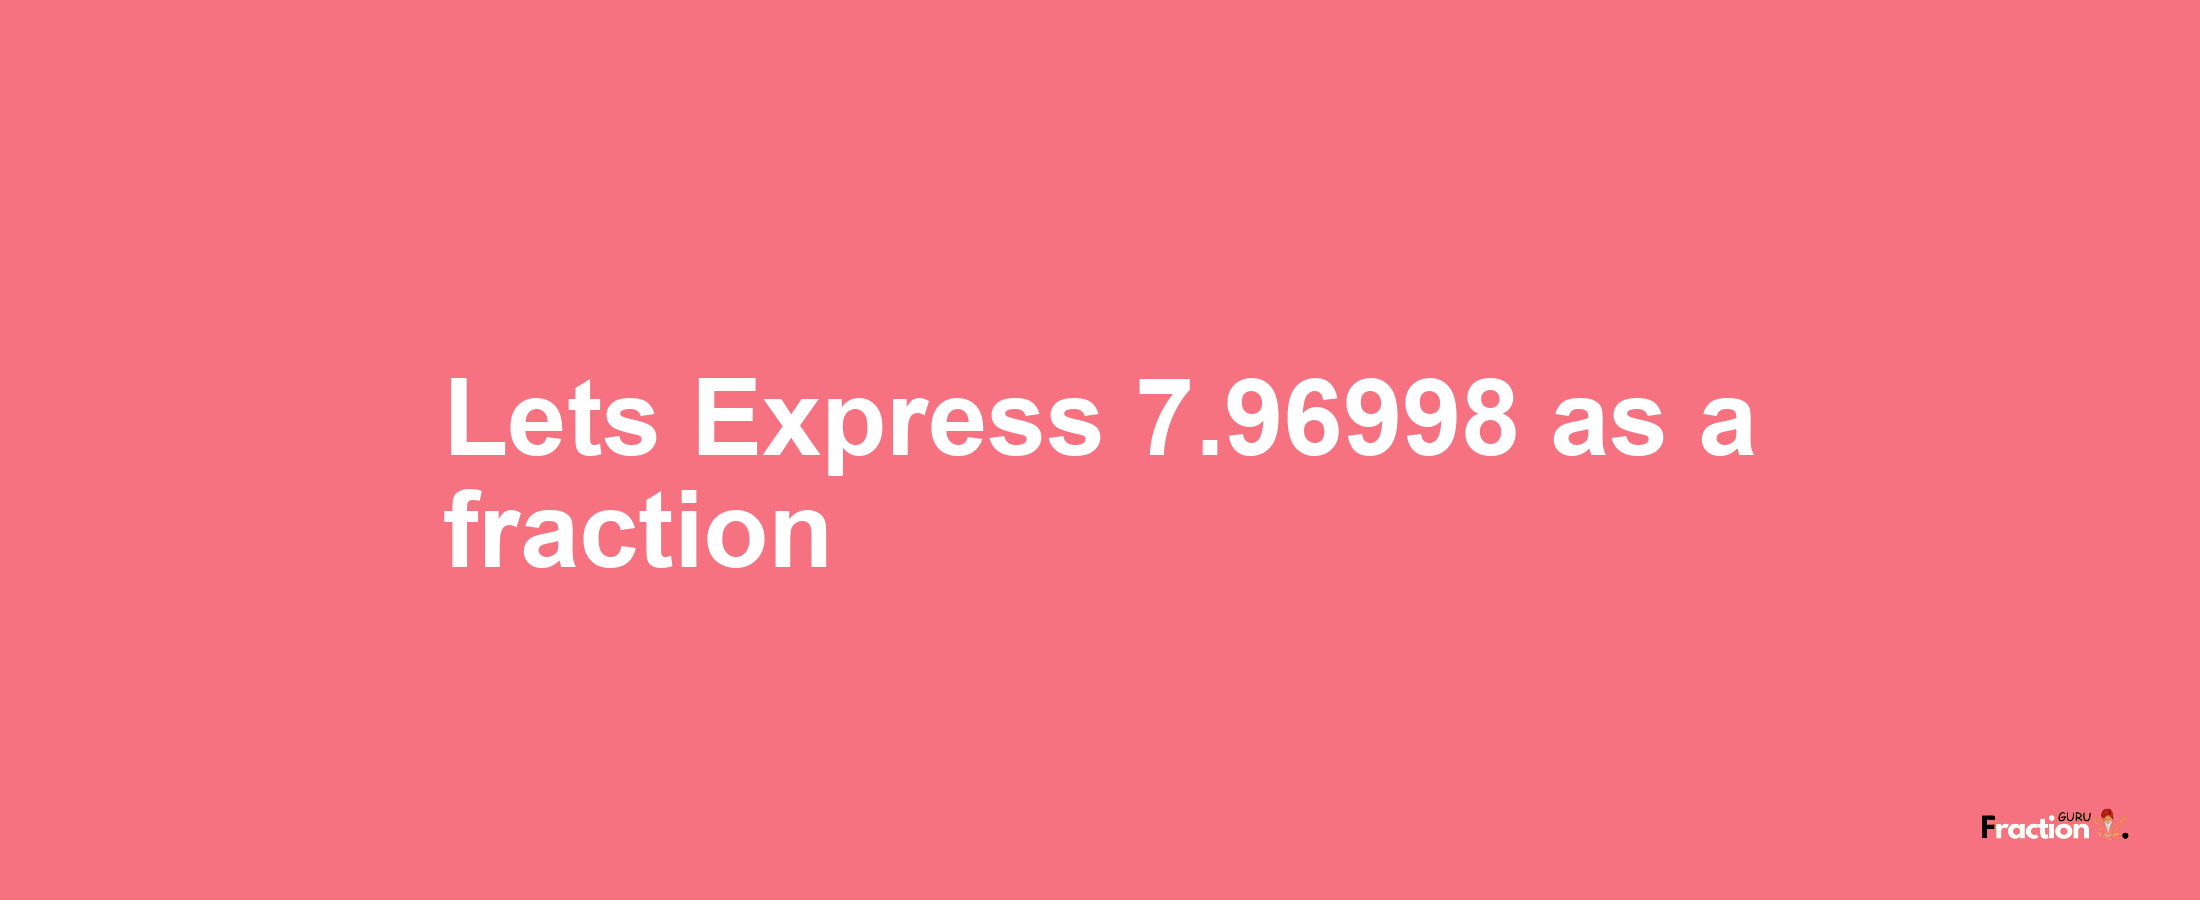 Lets Express 7.96998 as afraction